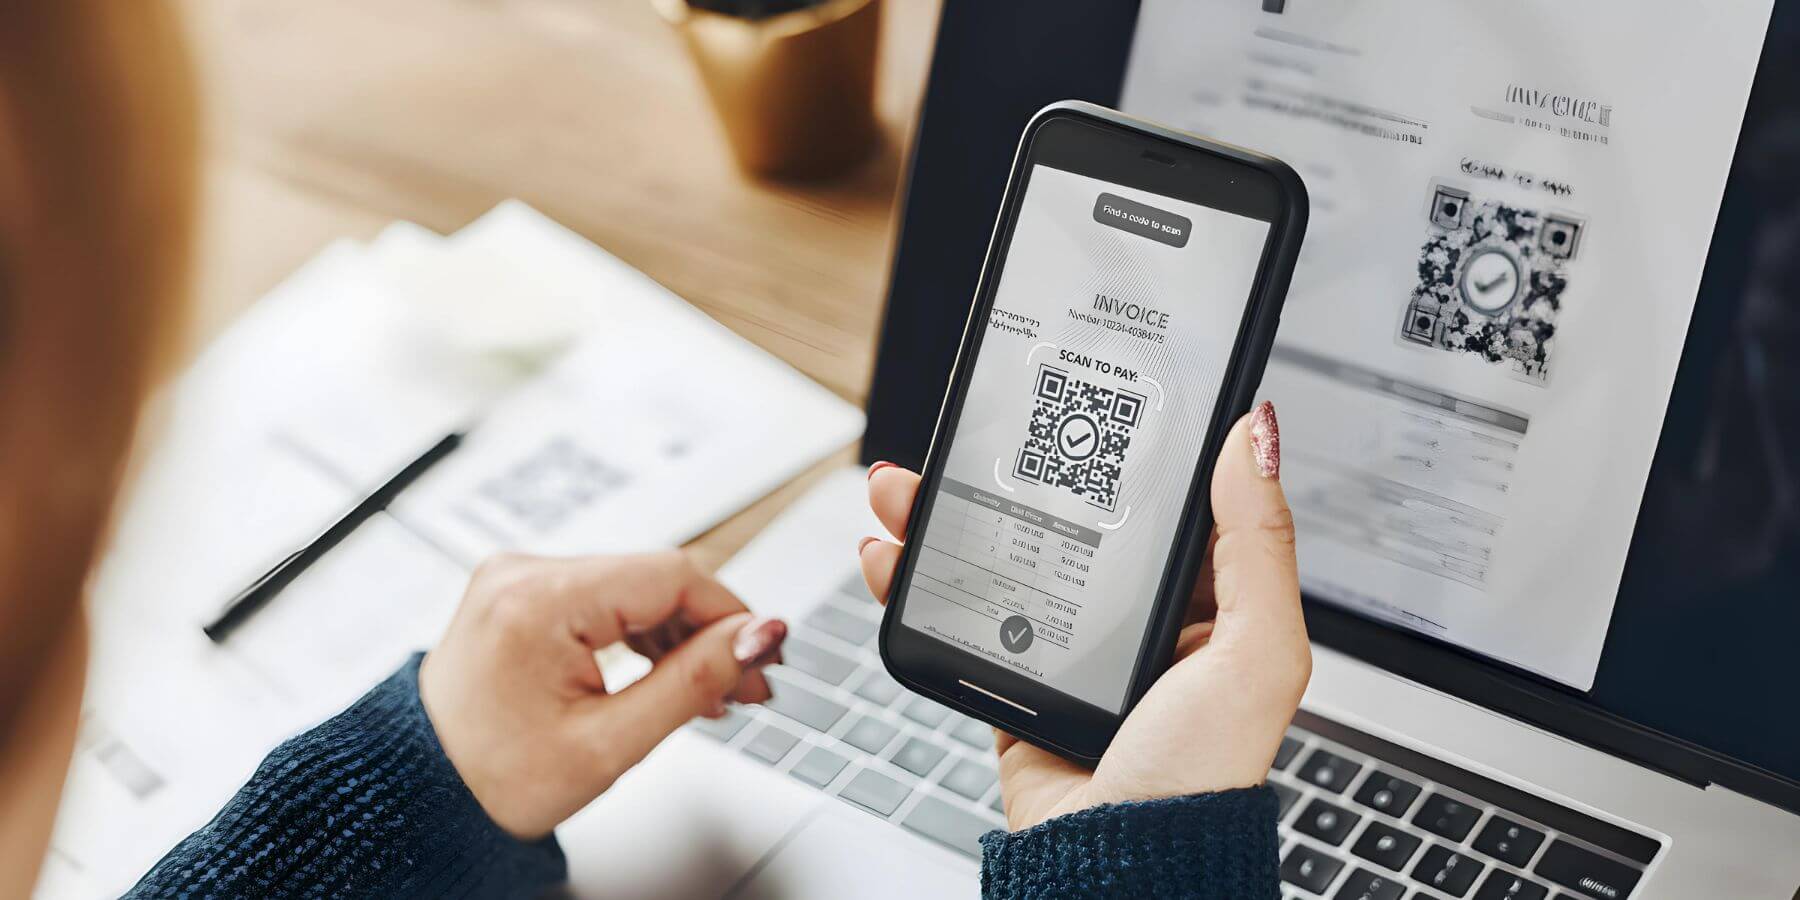 A person's hand securely holding a smartphone, with the phone's screen prominently displaying a QR code linked to a phishing scam. The QR code, designed to appear innocuous, is actually a deceptive tool used by scammers to trick individuals into revealing personal and financial information.